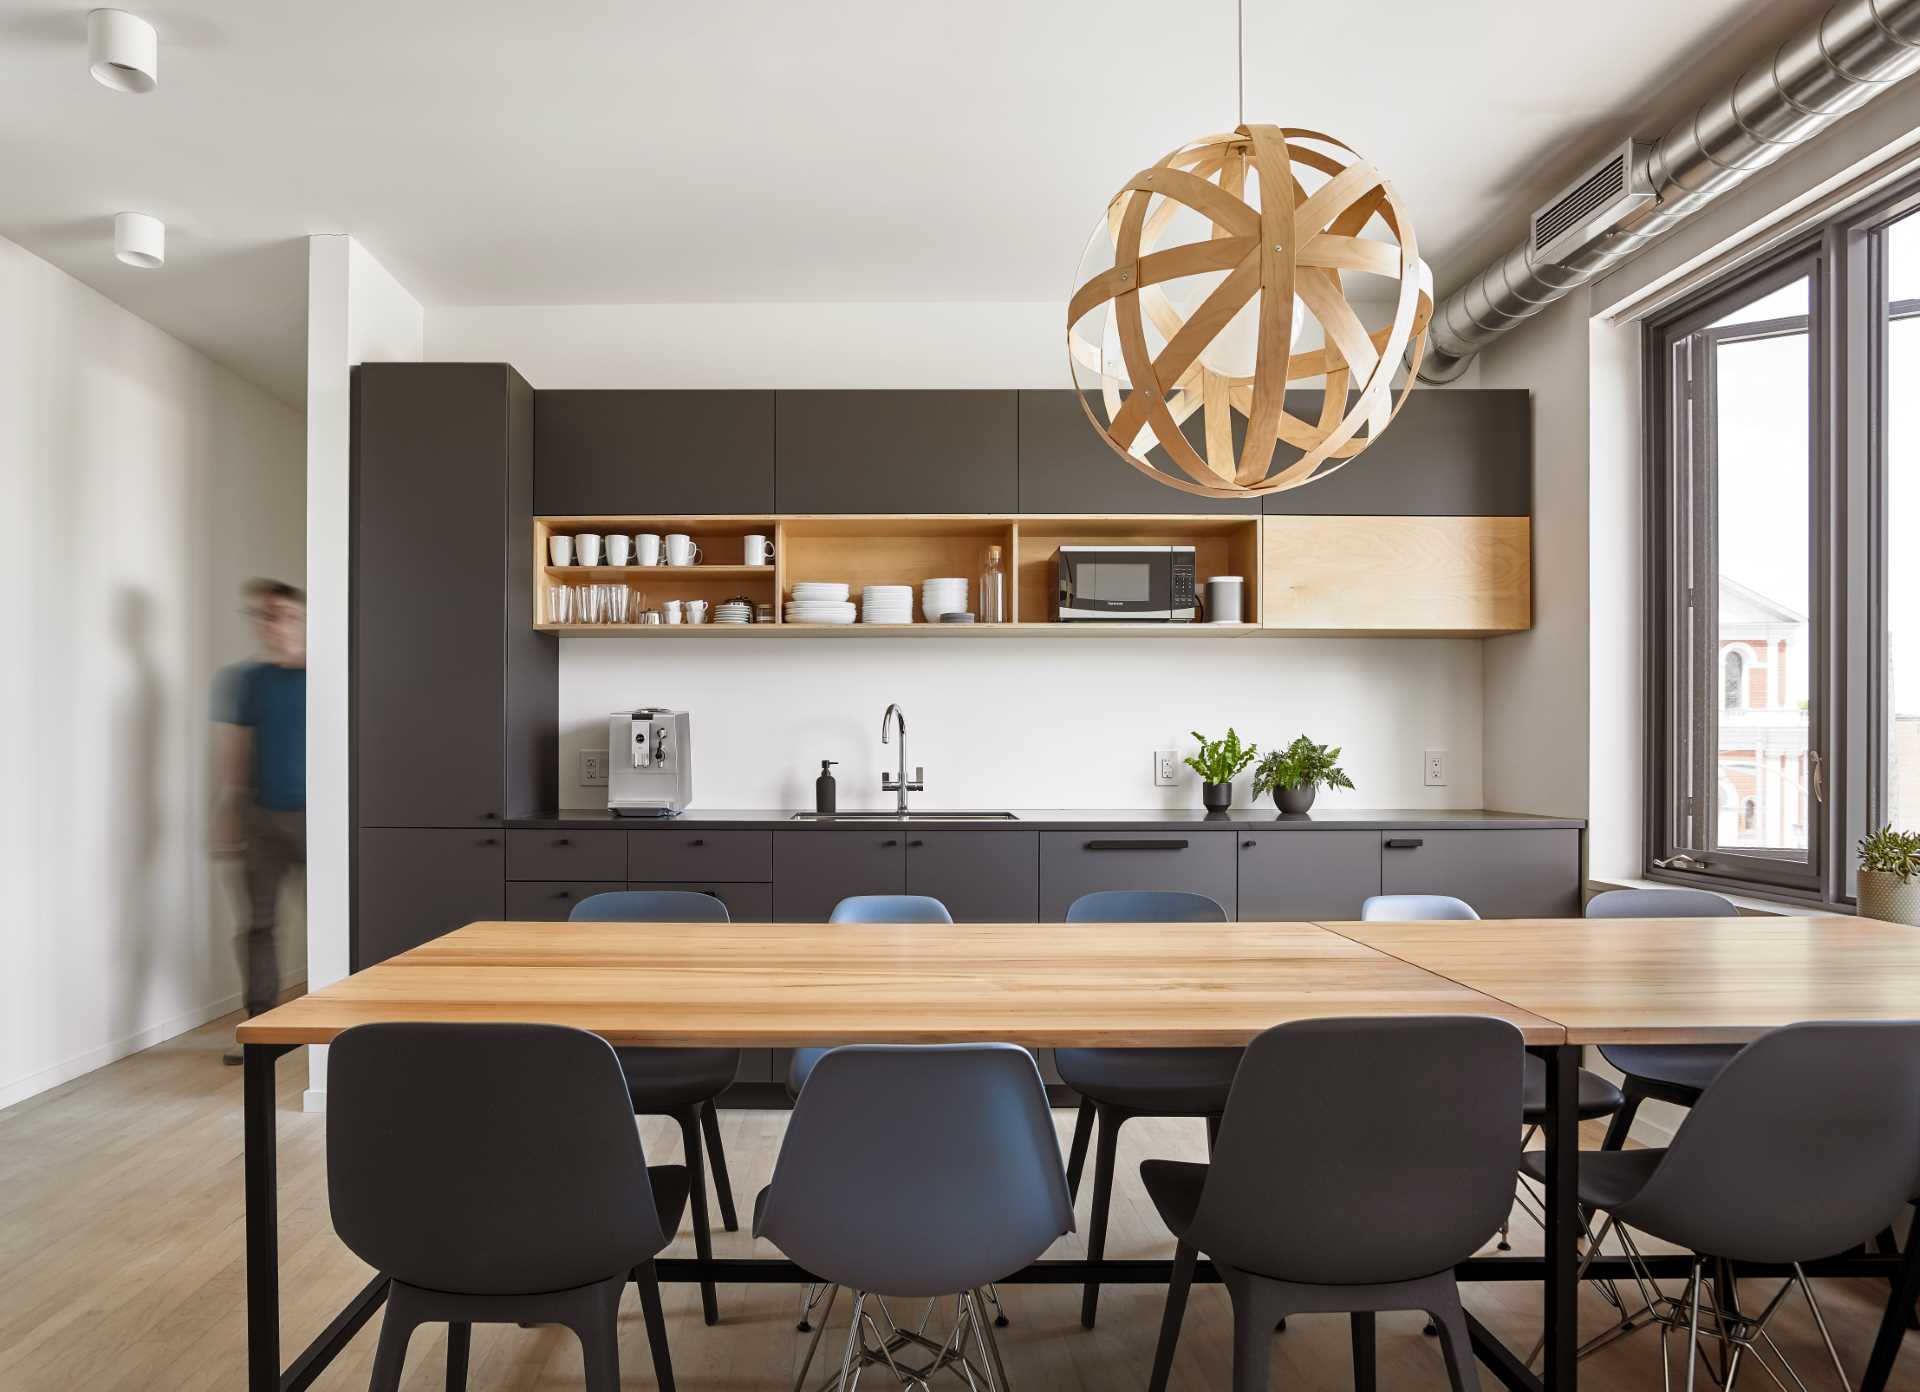 The matte black cabinets in the kitchen provide a backdrop for team lunches and group meetings.